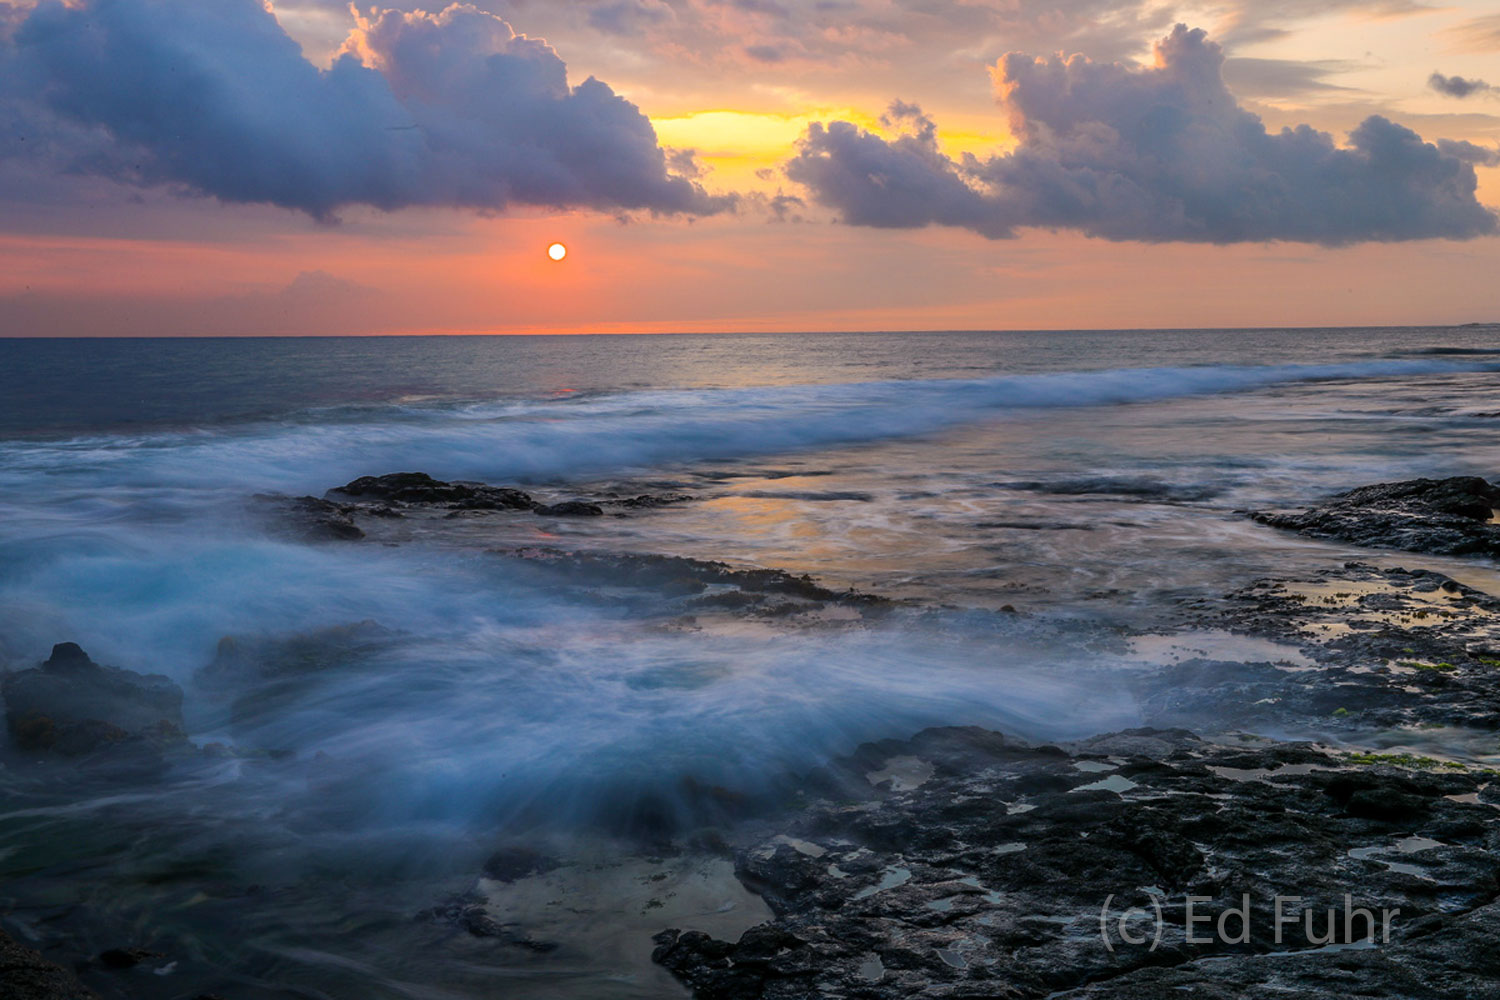 At dusk, this area near the lava tube reflects the beautiful skies, as the waters swirl across the lava shore.